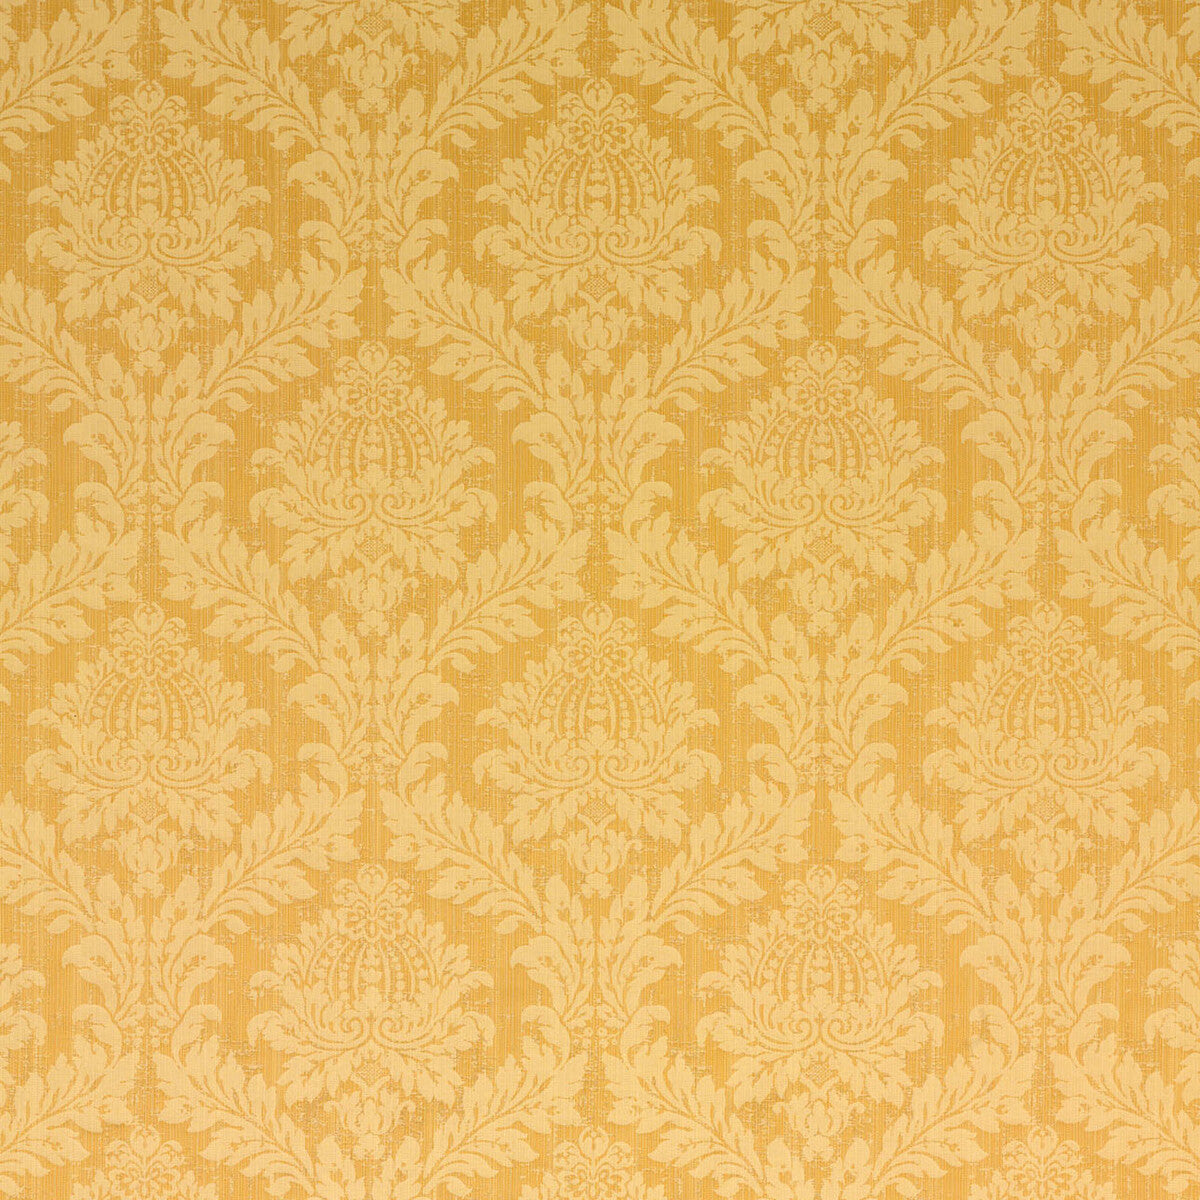 Lydford Damask fabric in gilt color - pattern BF10490.835.0 - by G P &amp; J Baker in the Simply Damask collection